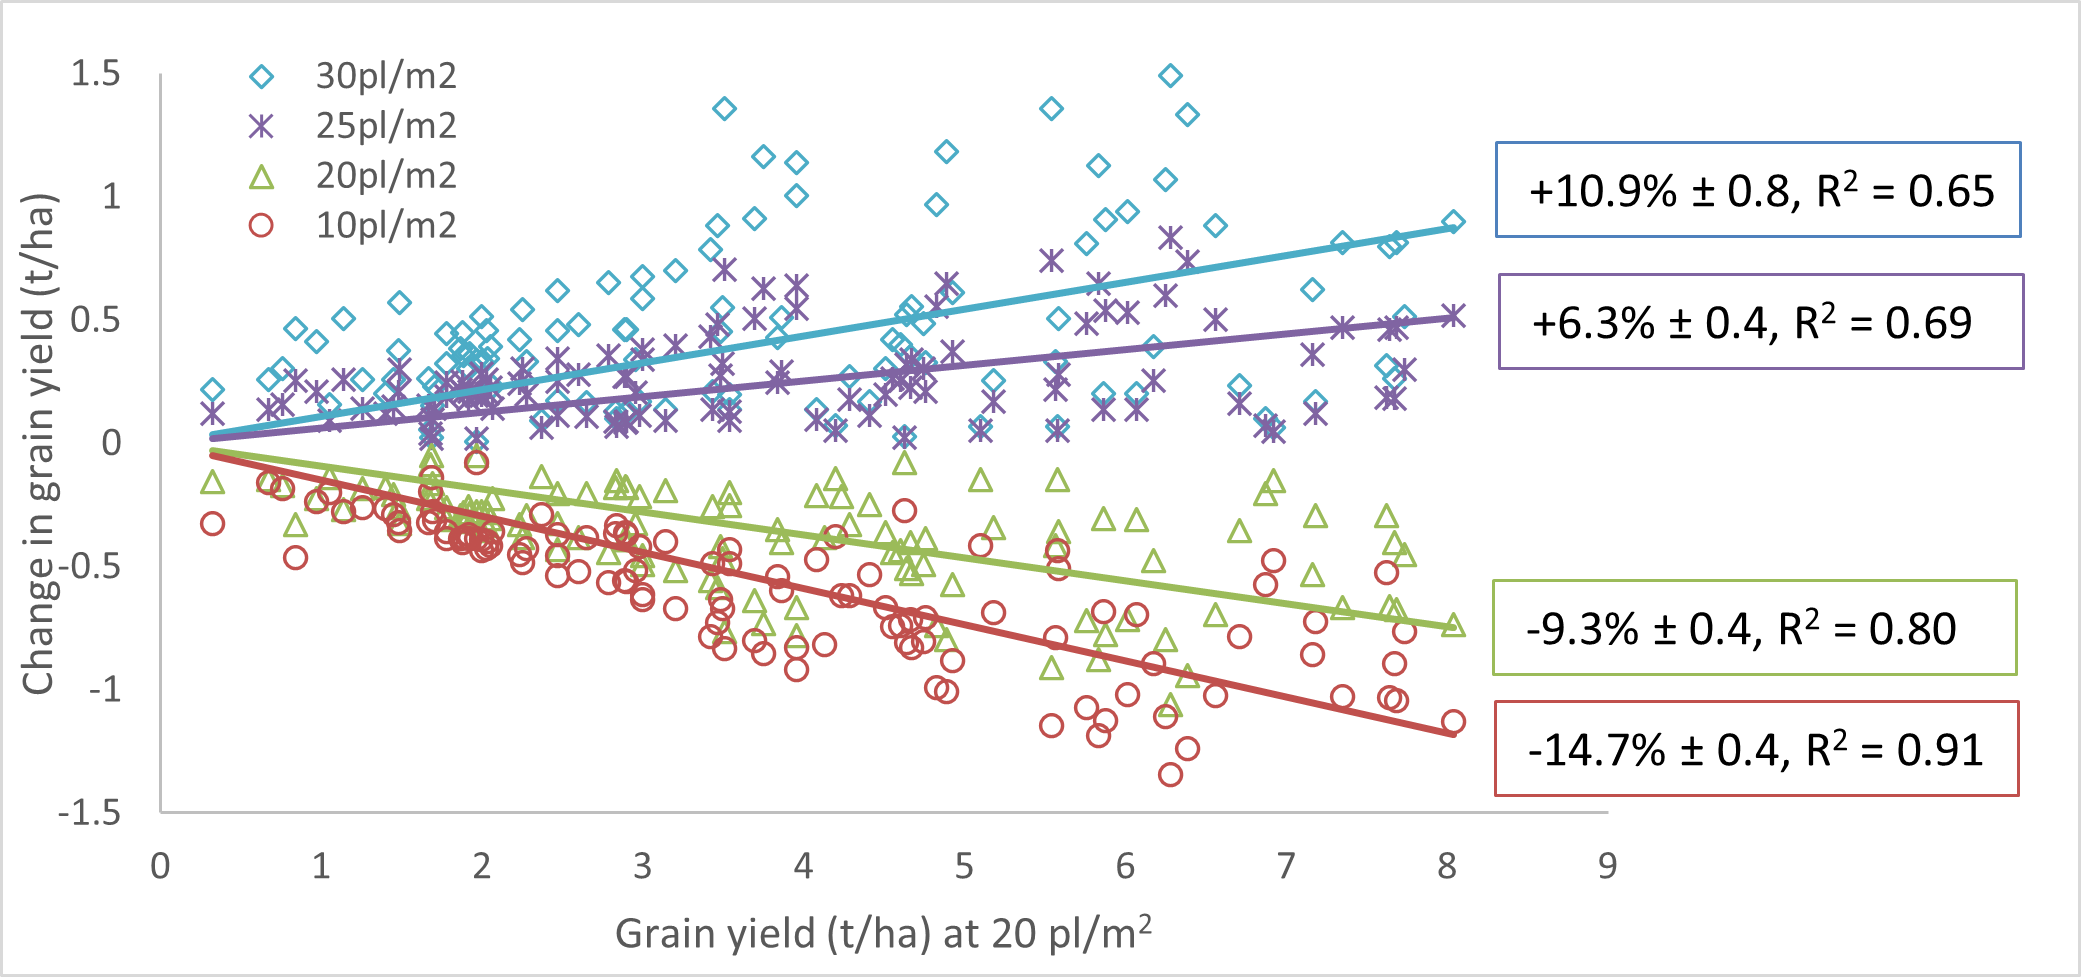 The change in grain yield relative to plant density compared with grain yield at 20 plants/m2. The slope of each line is presented as a percent of the grain yield at 20 plants/m2, ± the standard error.